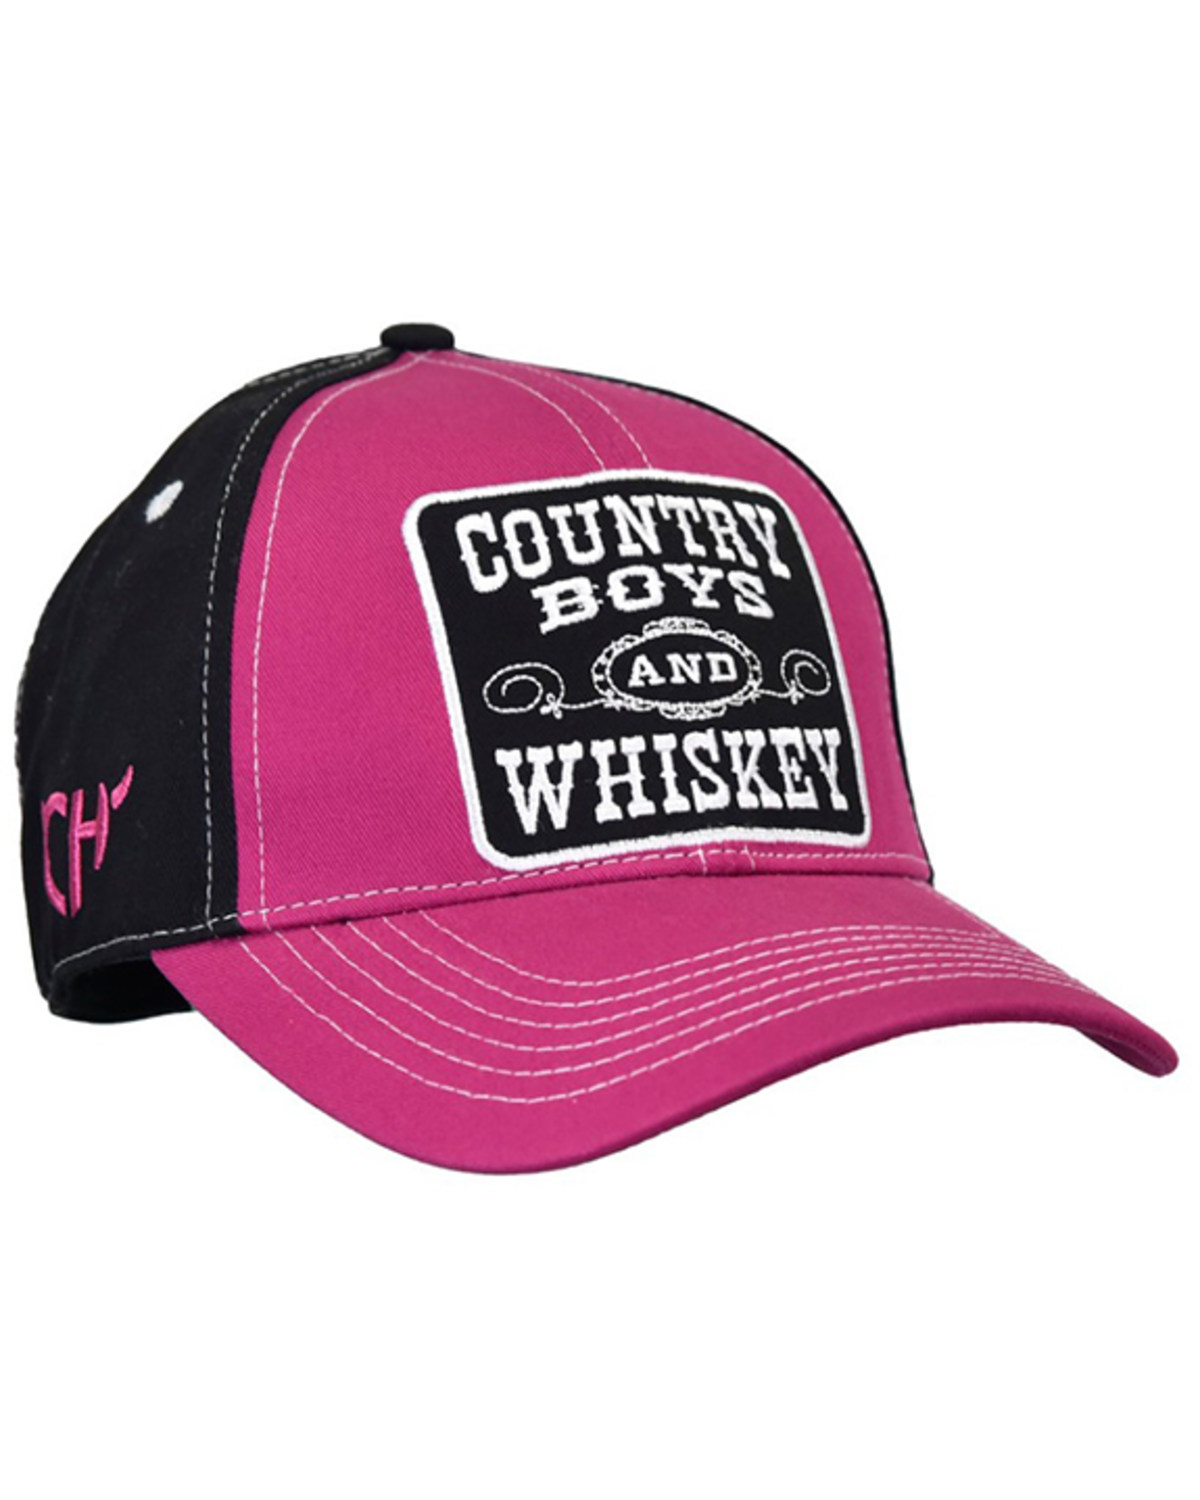 Cowgirl Hardware Women's Country Boys and Whiskey Baseball Cap